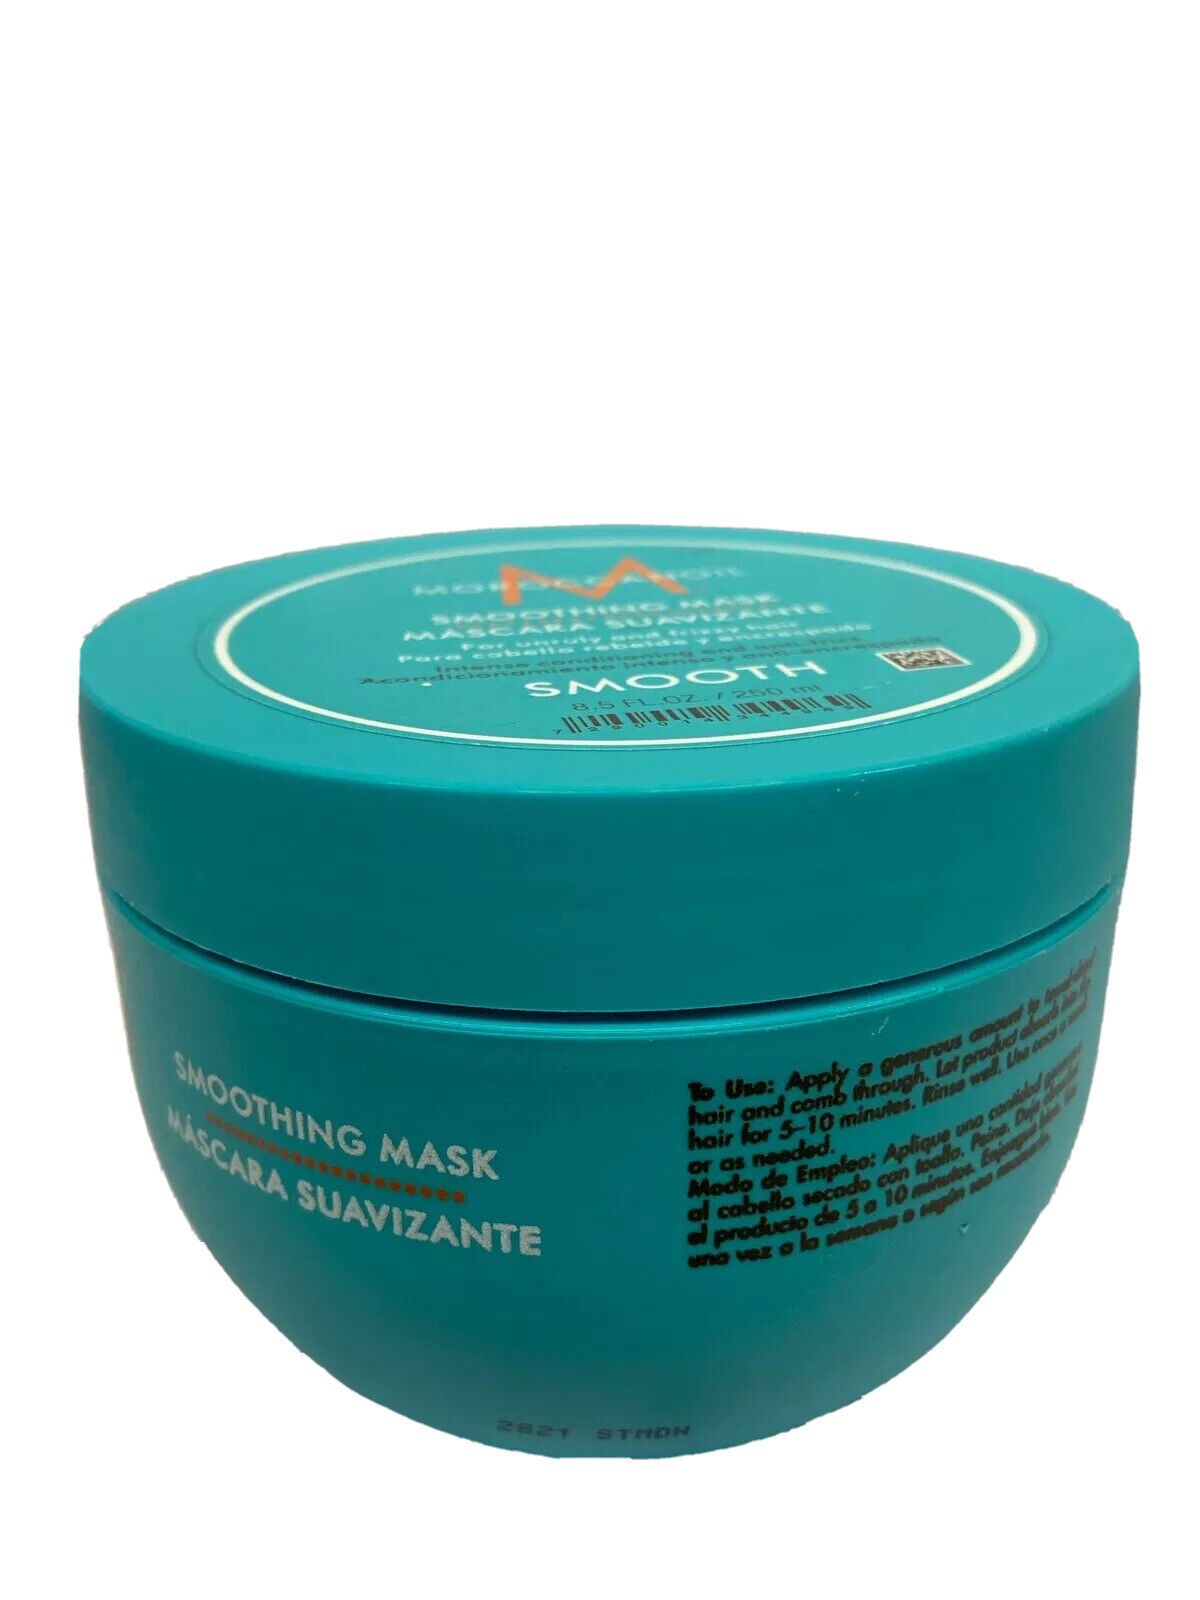 MOROCCAN OIL SMOOTHINH MASK 8.5oz LOOK AT AD PICS PLEASE